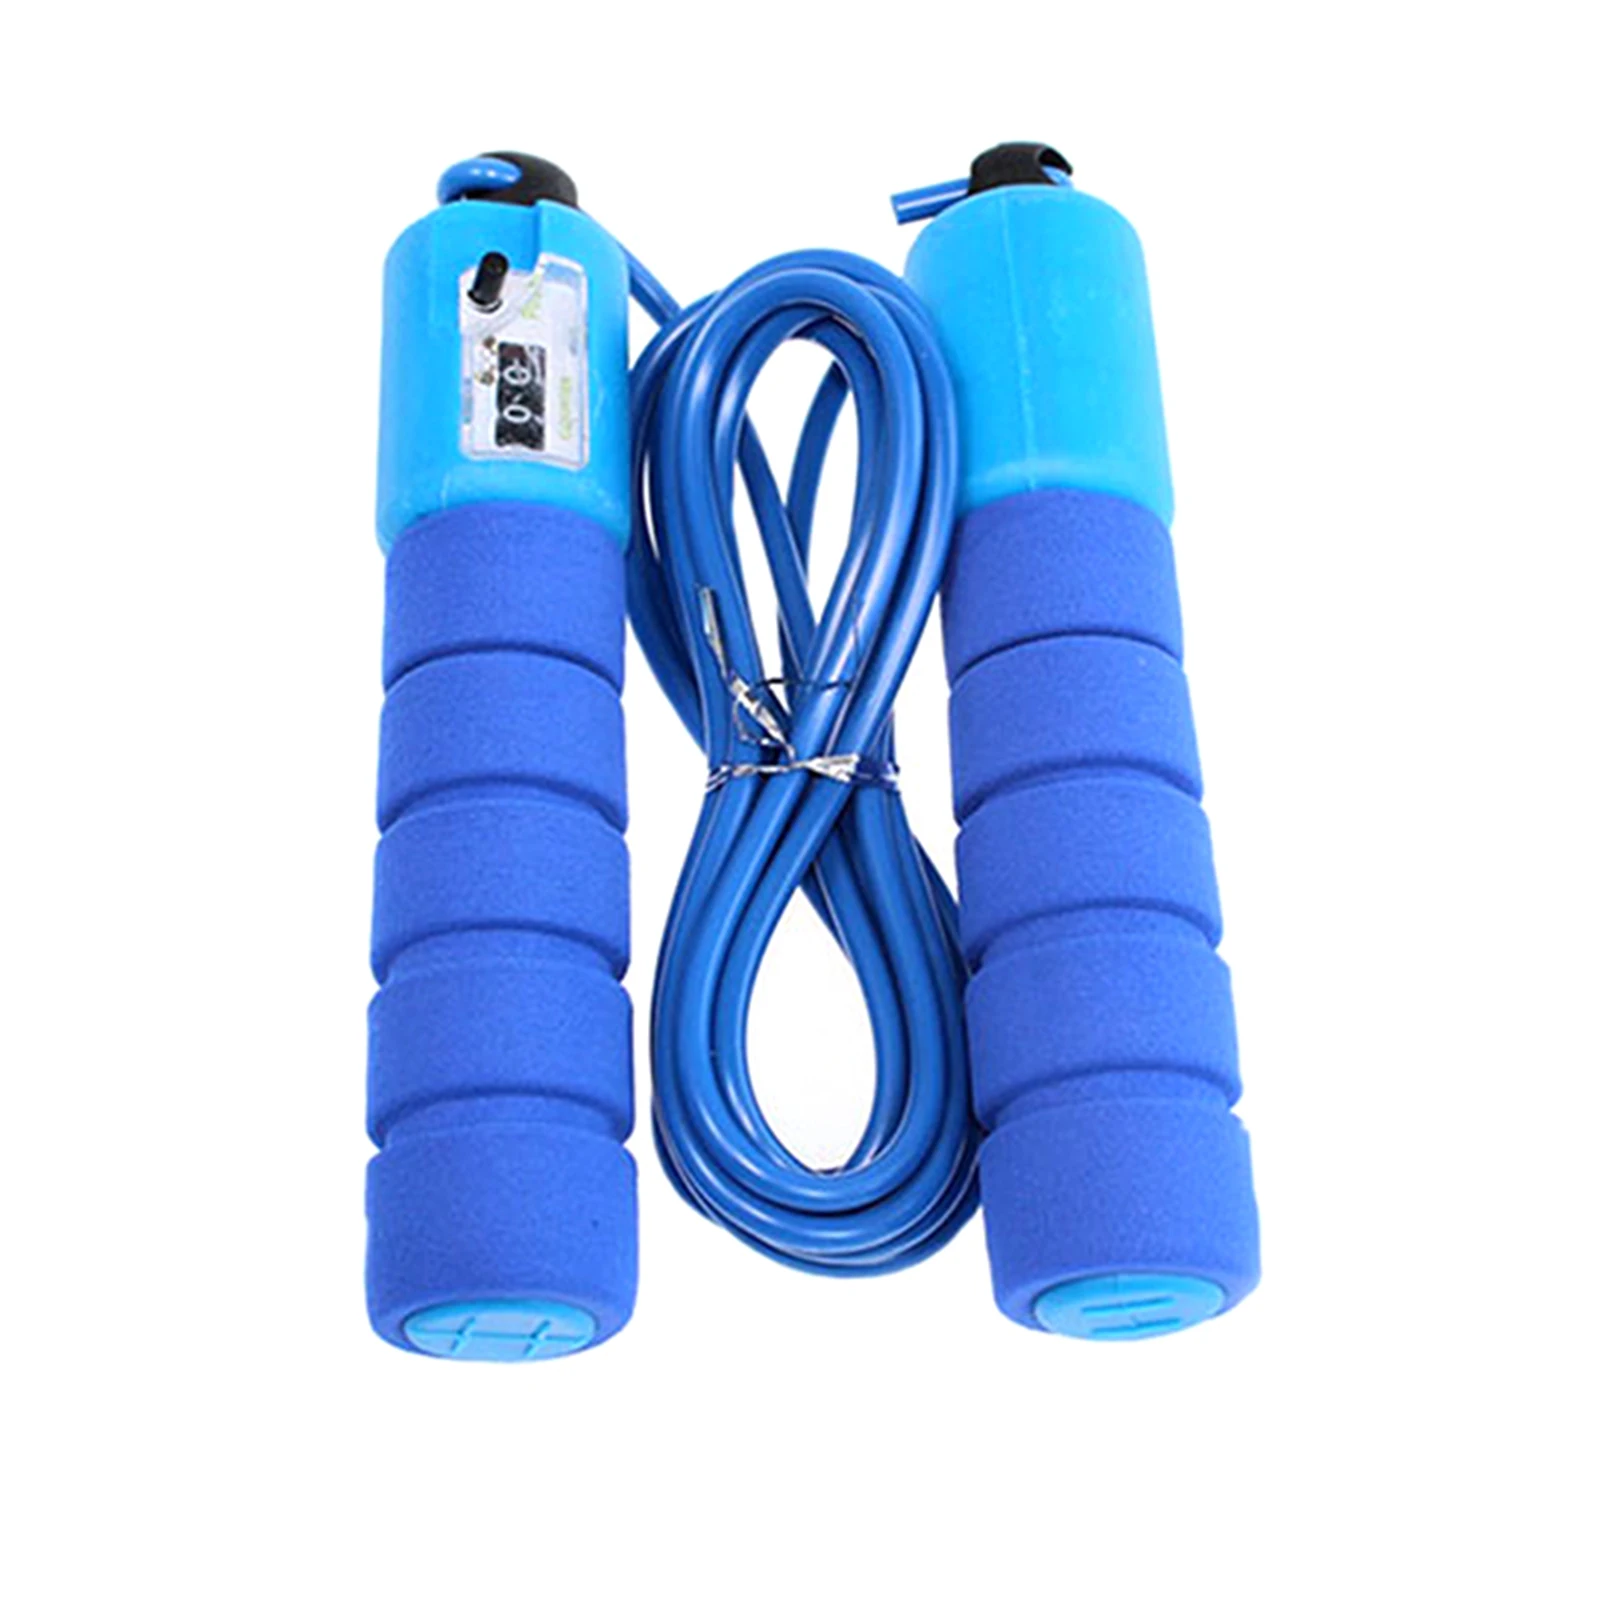 Count Your Jumps Colour Skipping Adjustable Adult & Kids Counting Skipping Rope 